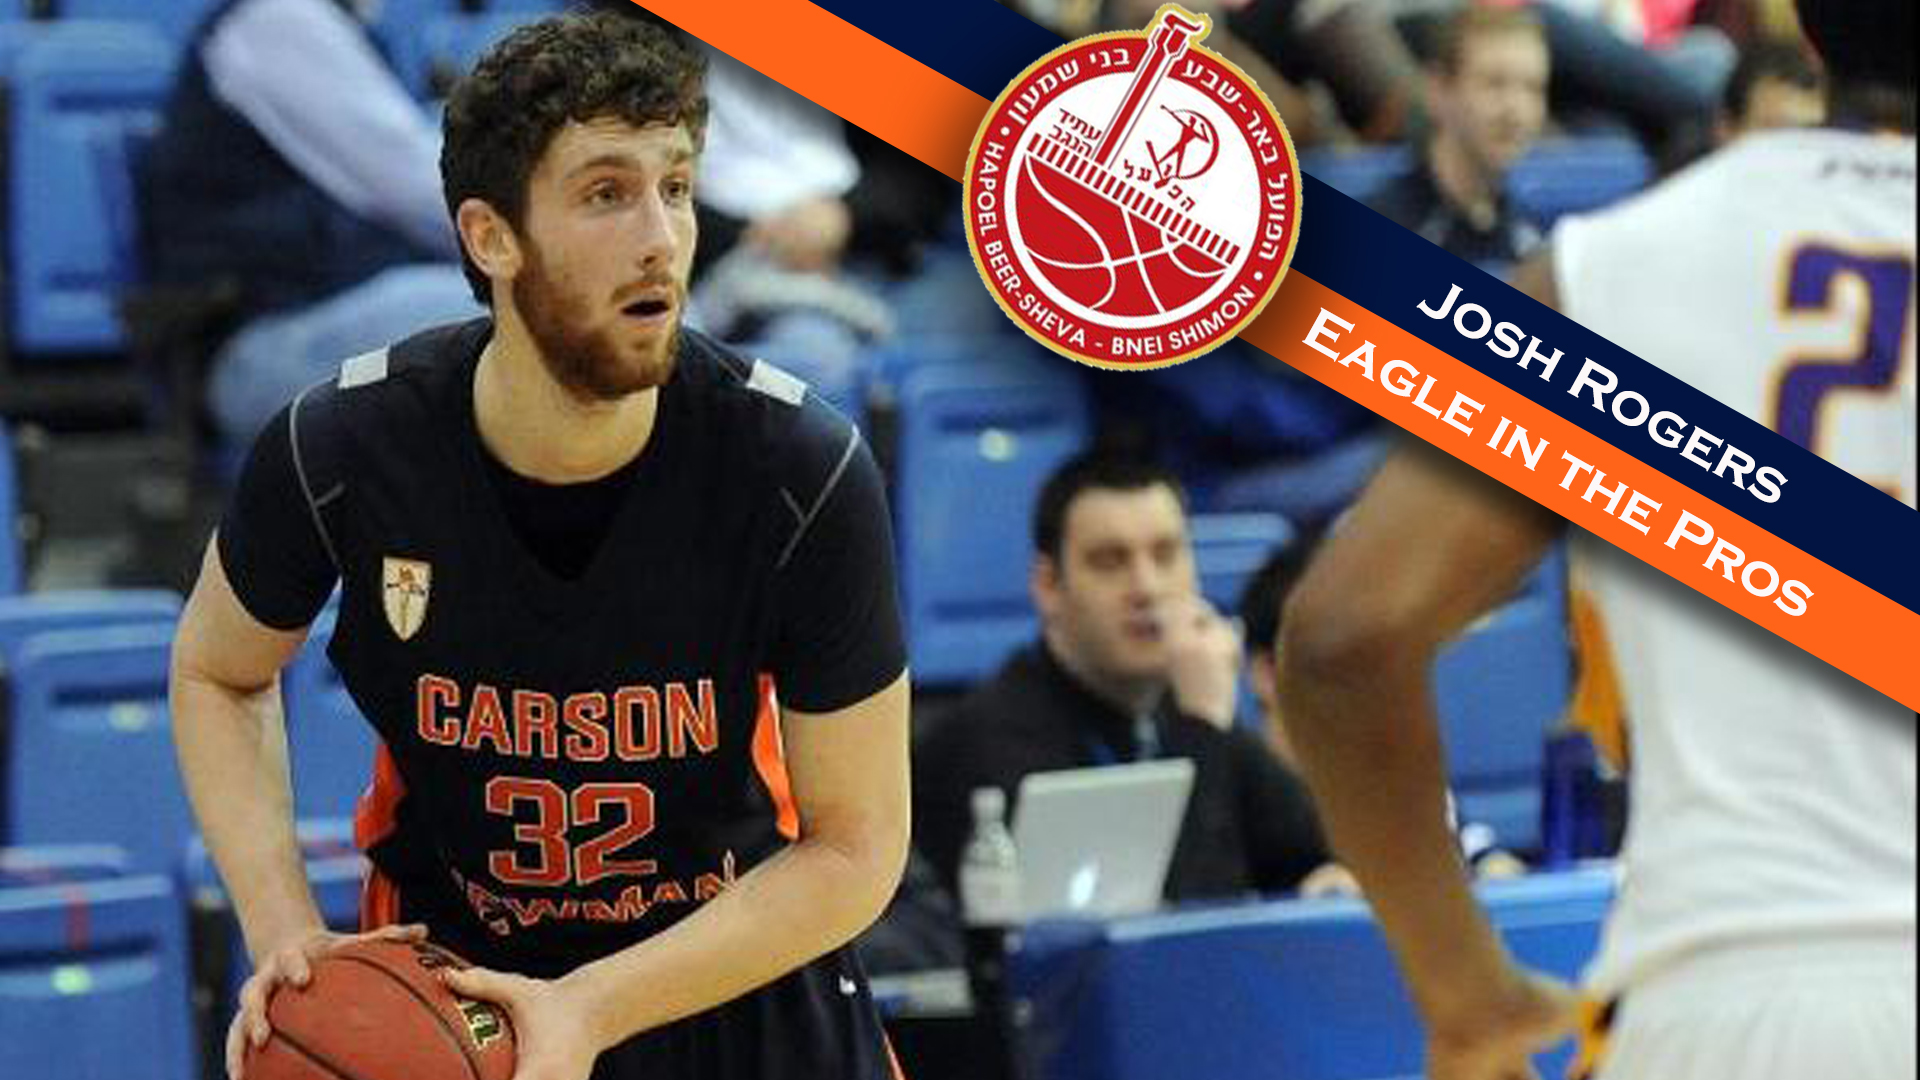 Rogers signs professional contract with Hapoel Beer Sheva